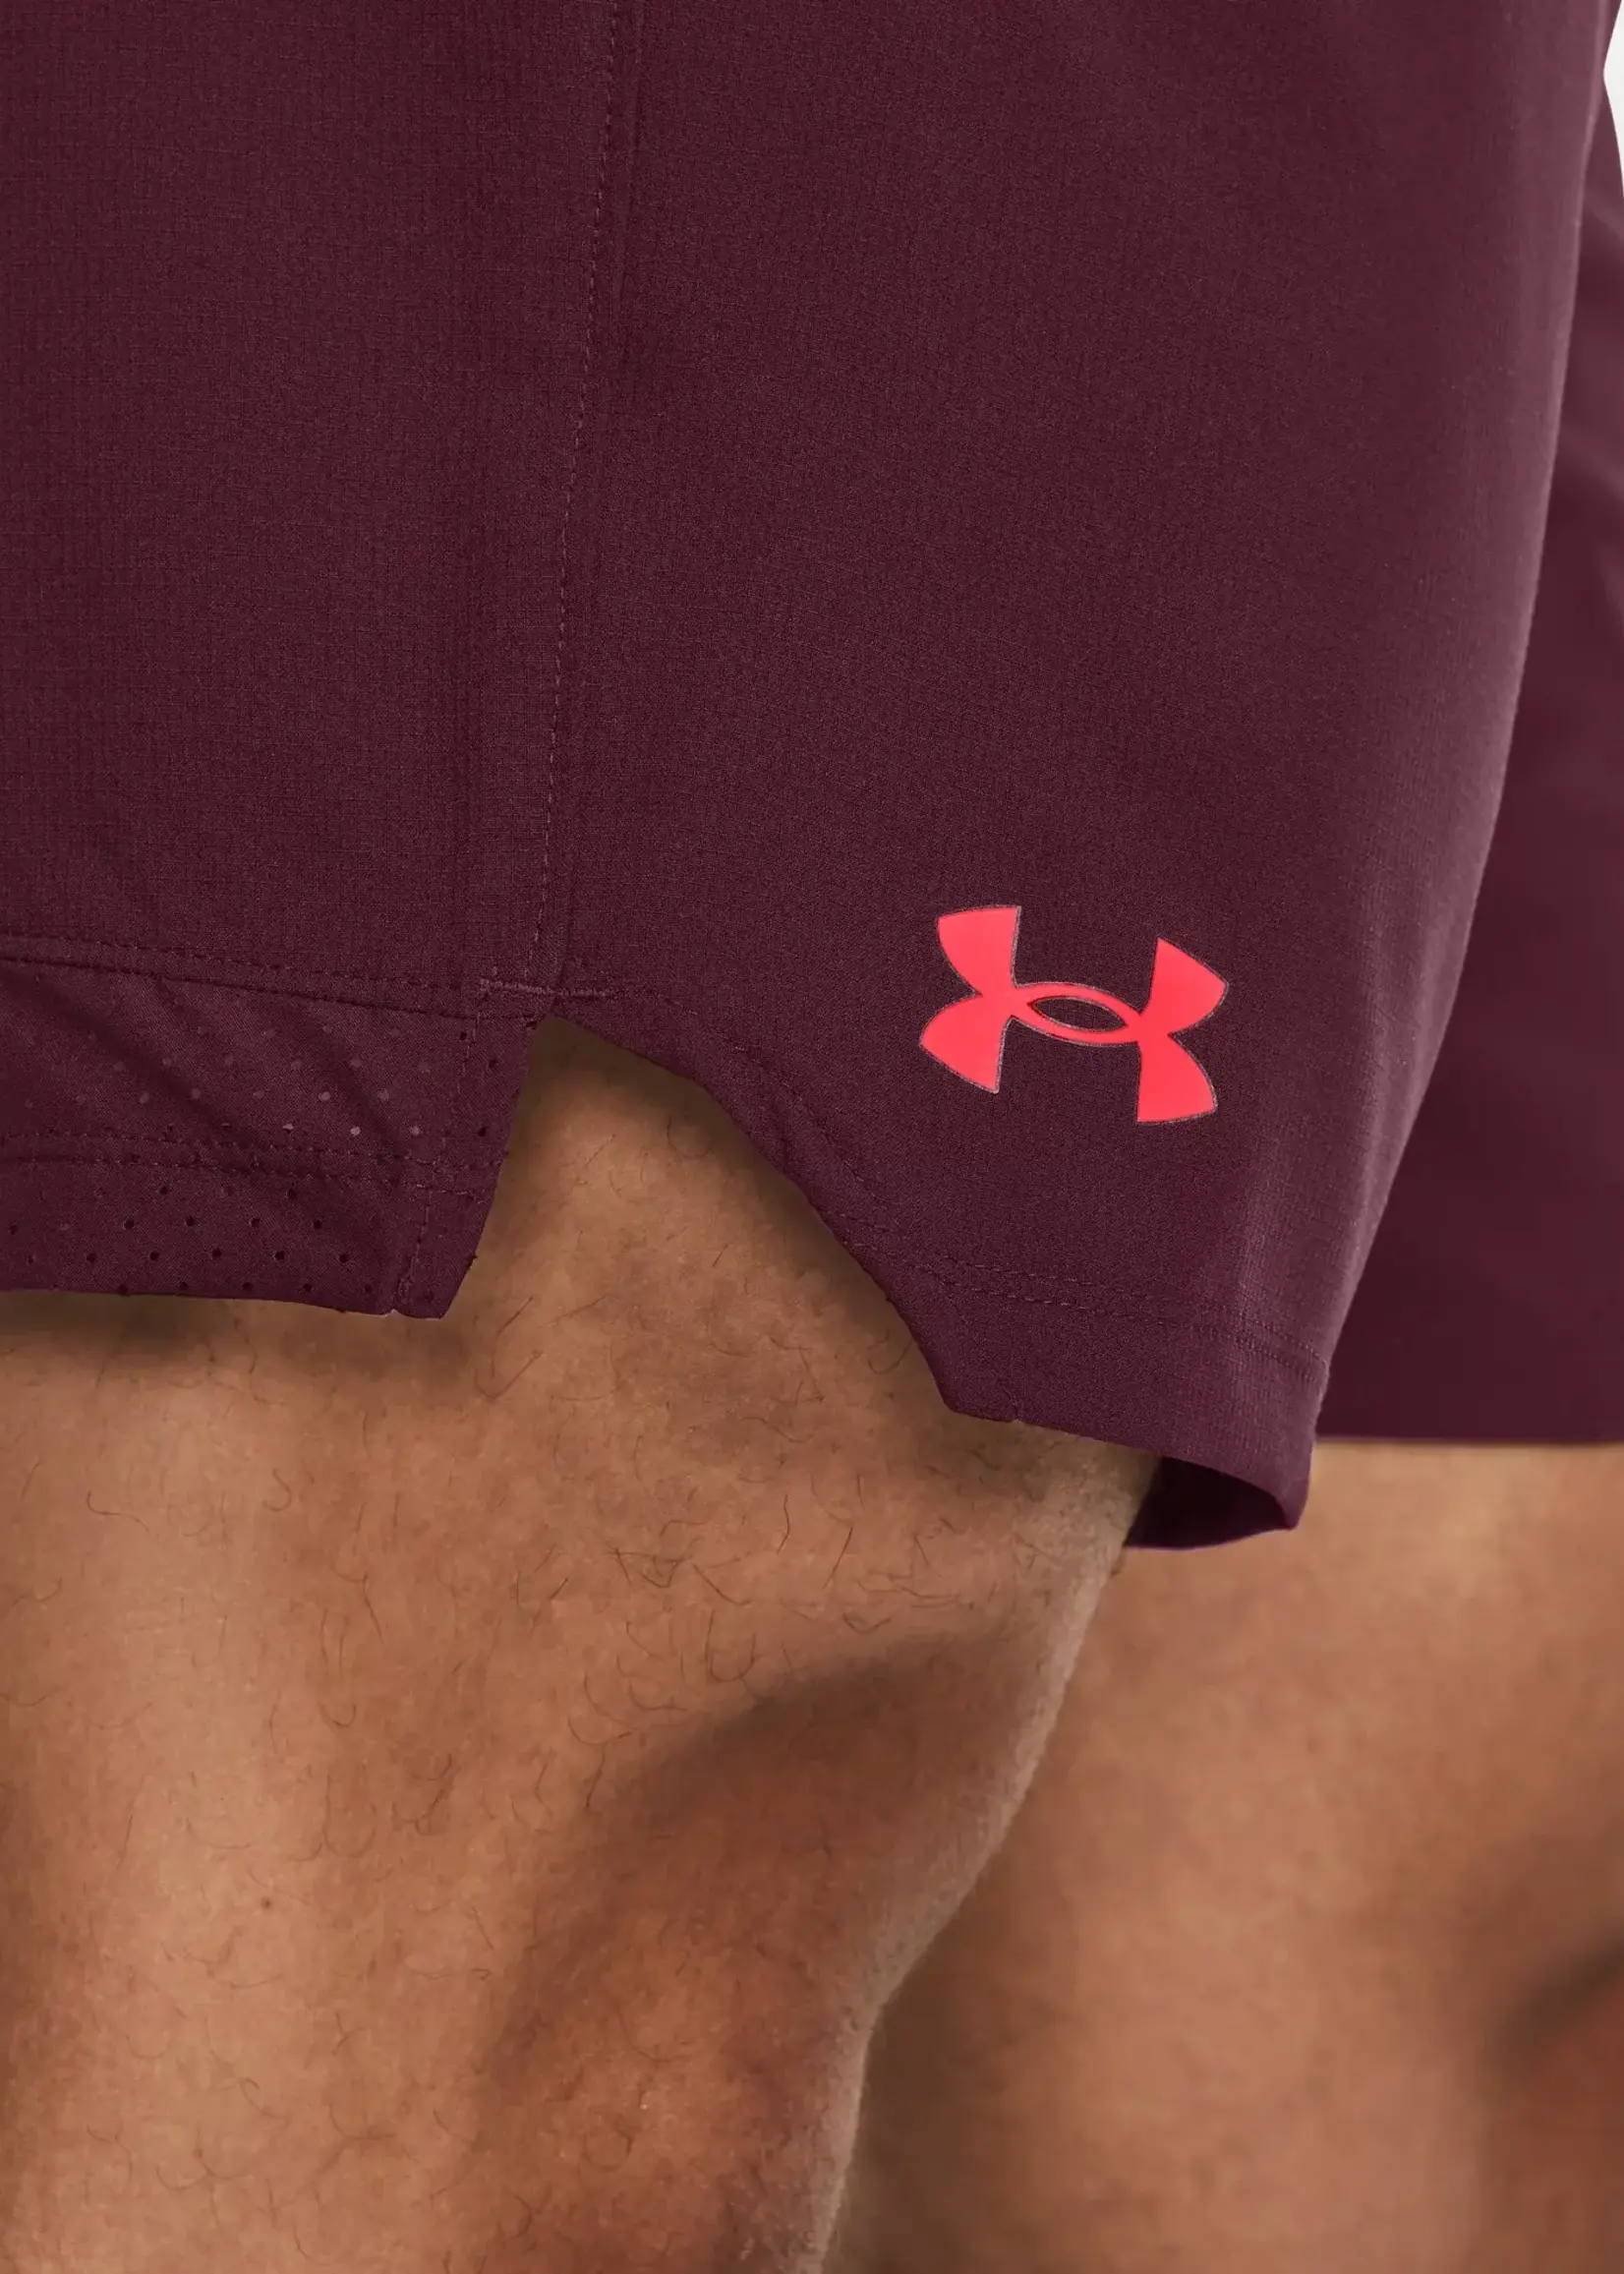 Under Armour Ua Vanish Woven 6In Shorts-Mrn